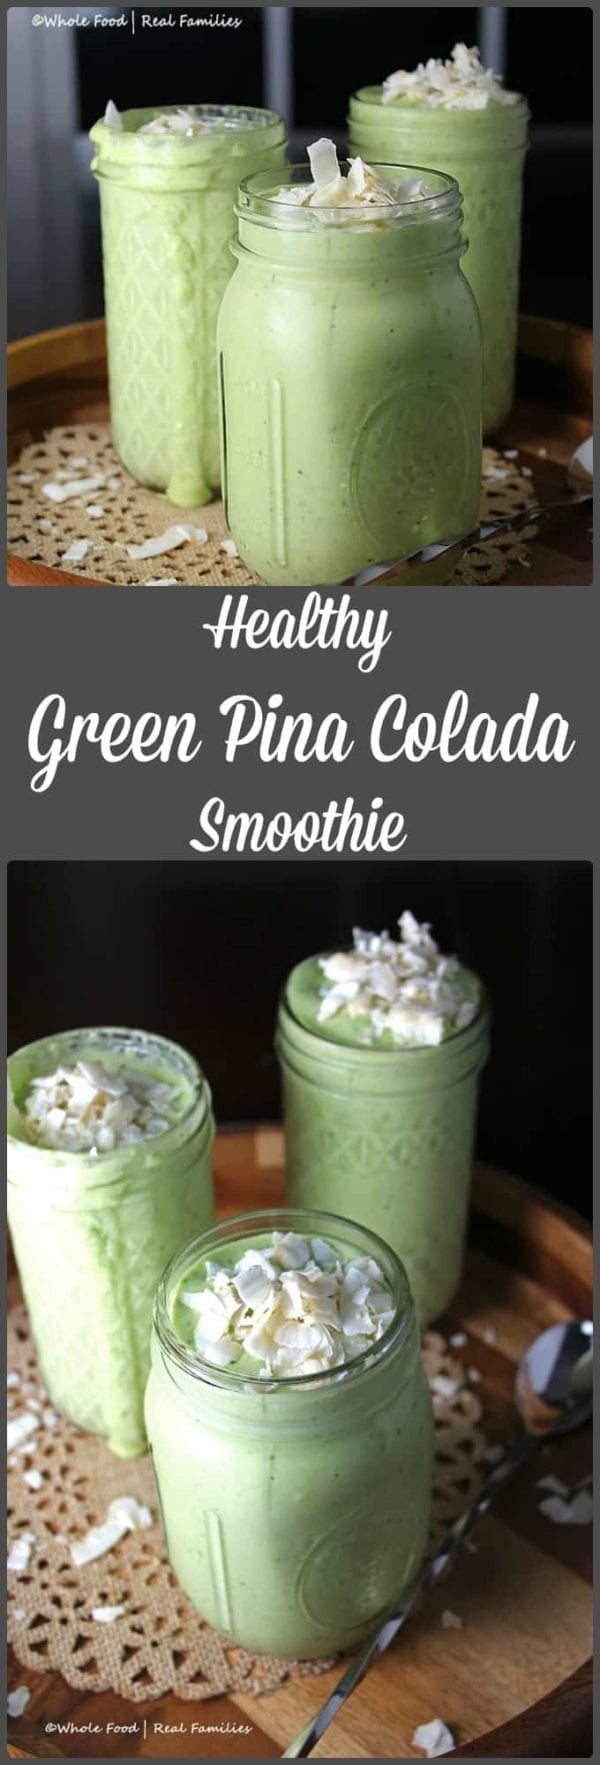 Healthy Green Pina Colada Smoothie | My Nourished Home